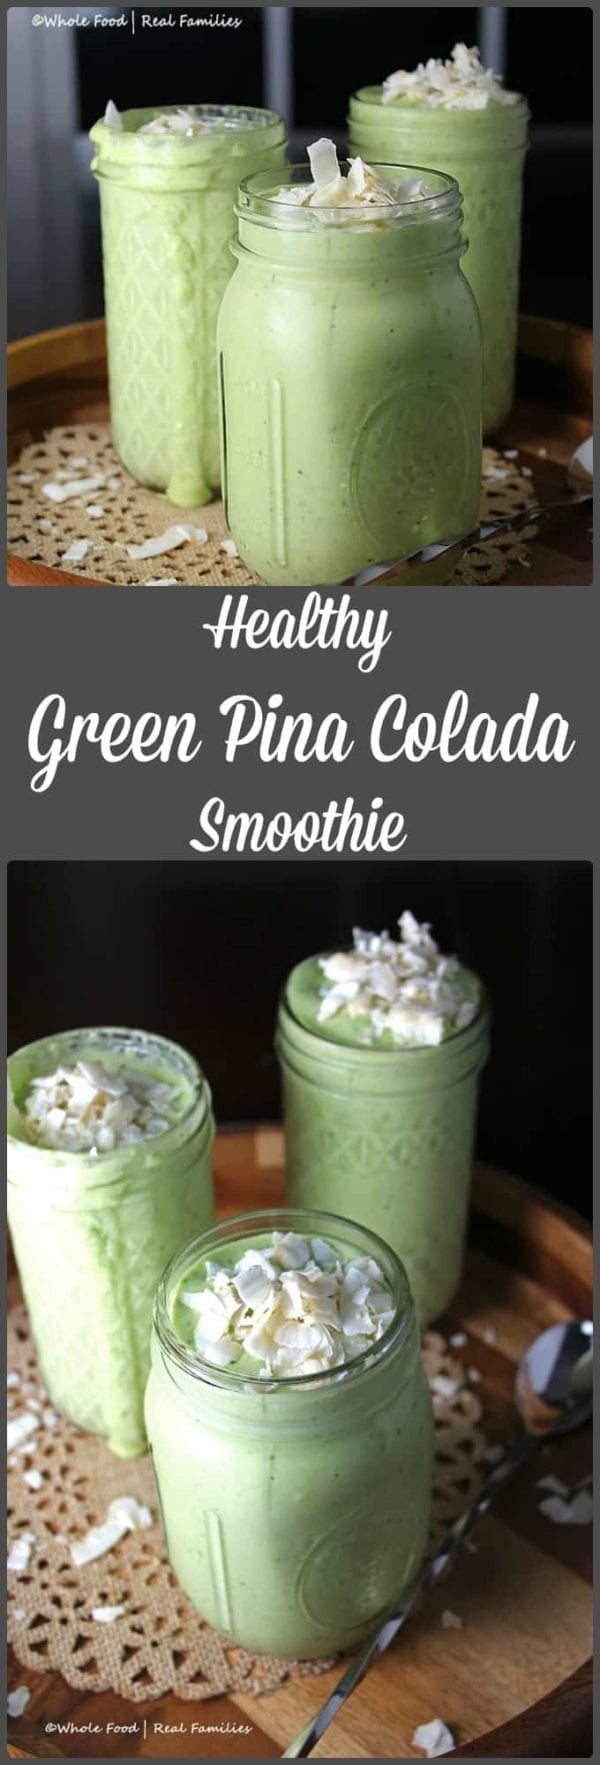 Healthy Green Pina Colada Smoothie | My Nourished Home